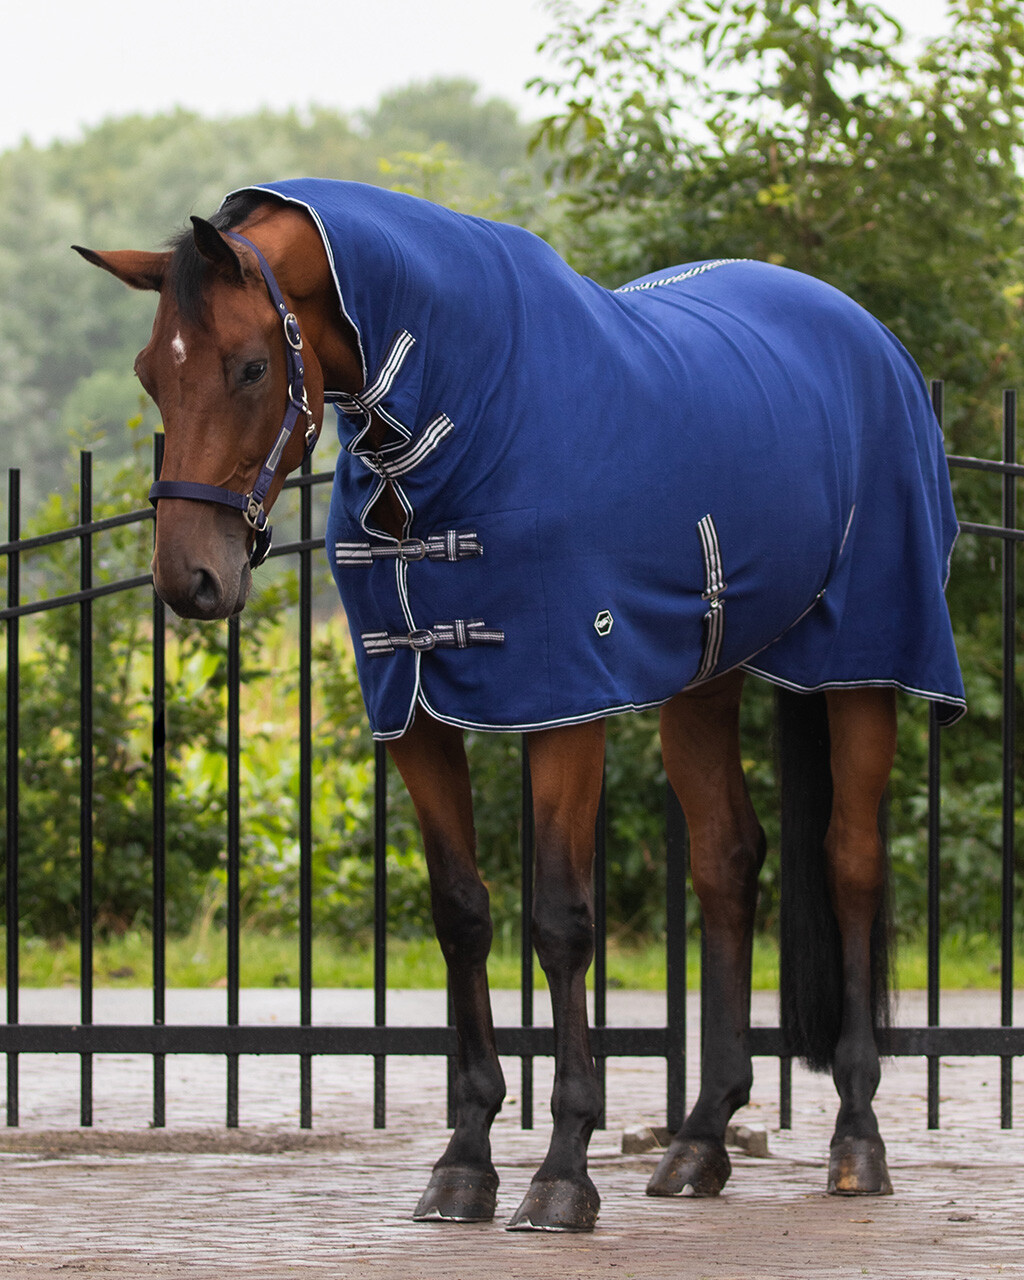 NEW QHP SHOW FLEECE RUG IN PETROL /SILVER CLEARNCE SIZE SMALL TO EXTRA LARGE 